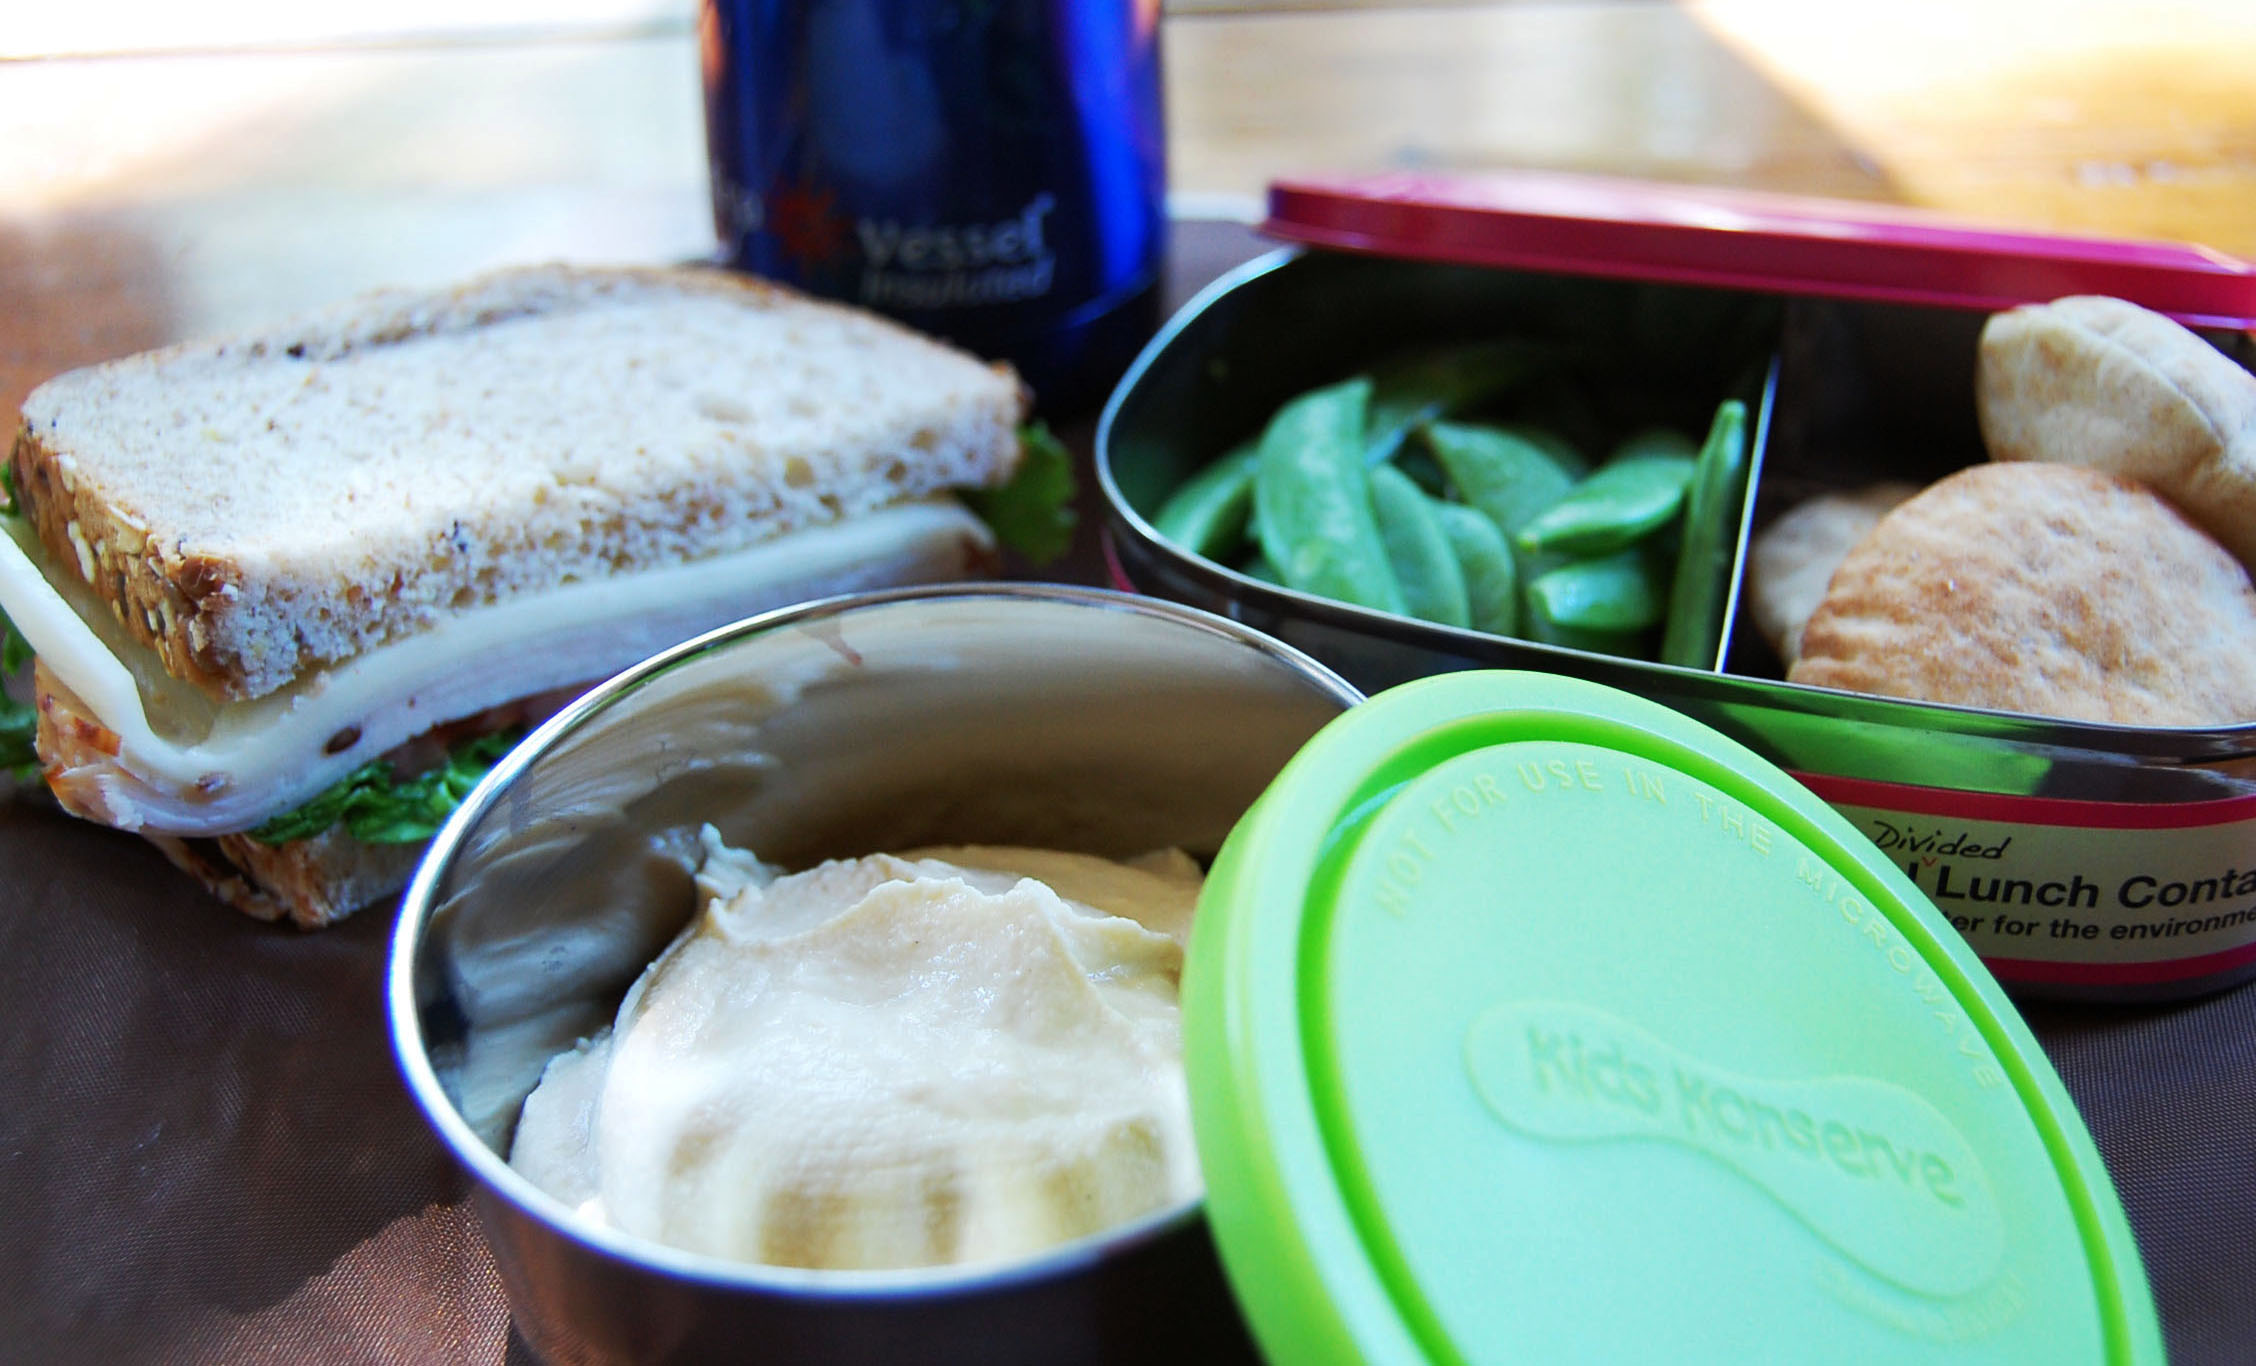 5 Ideas for Healthy and Fun Lunches